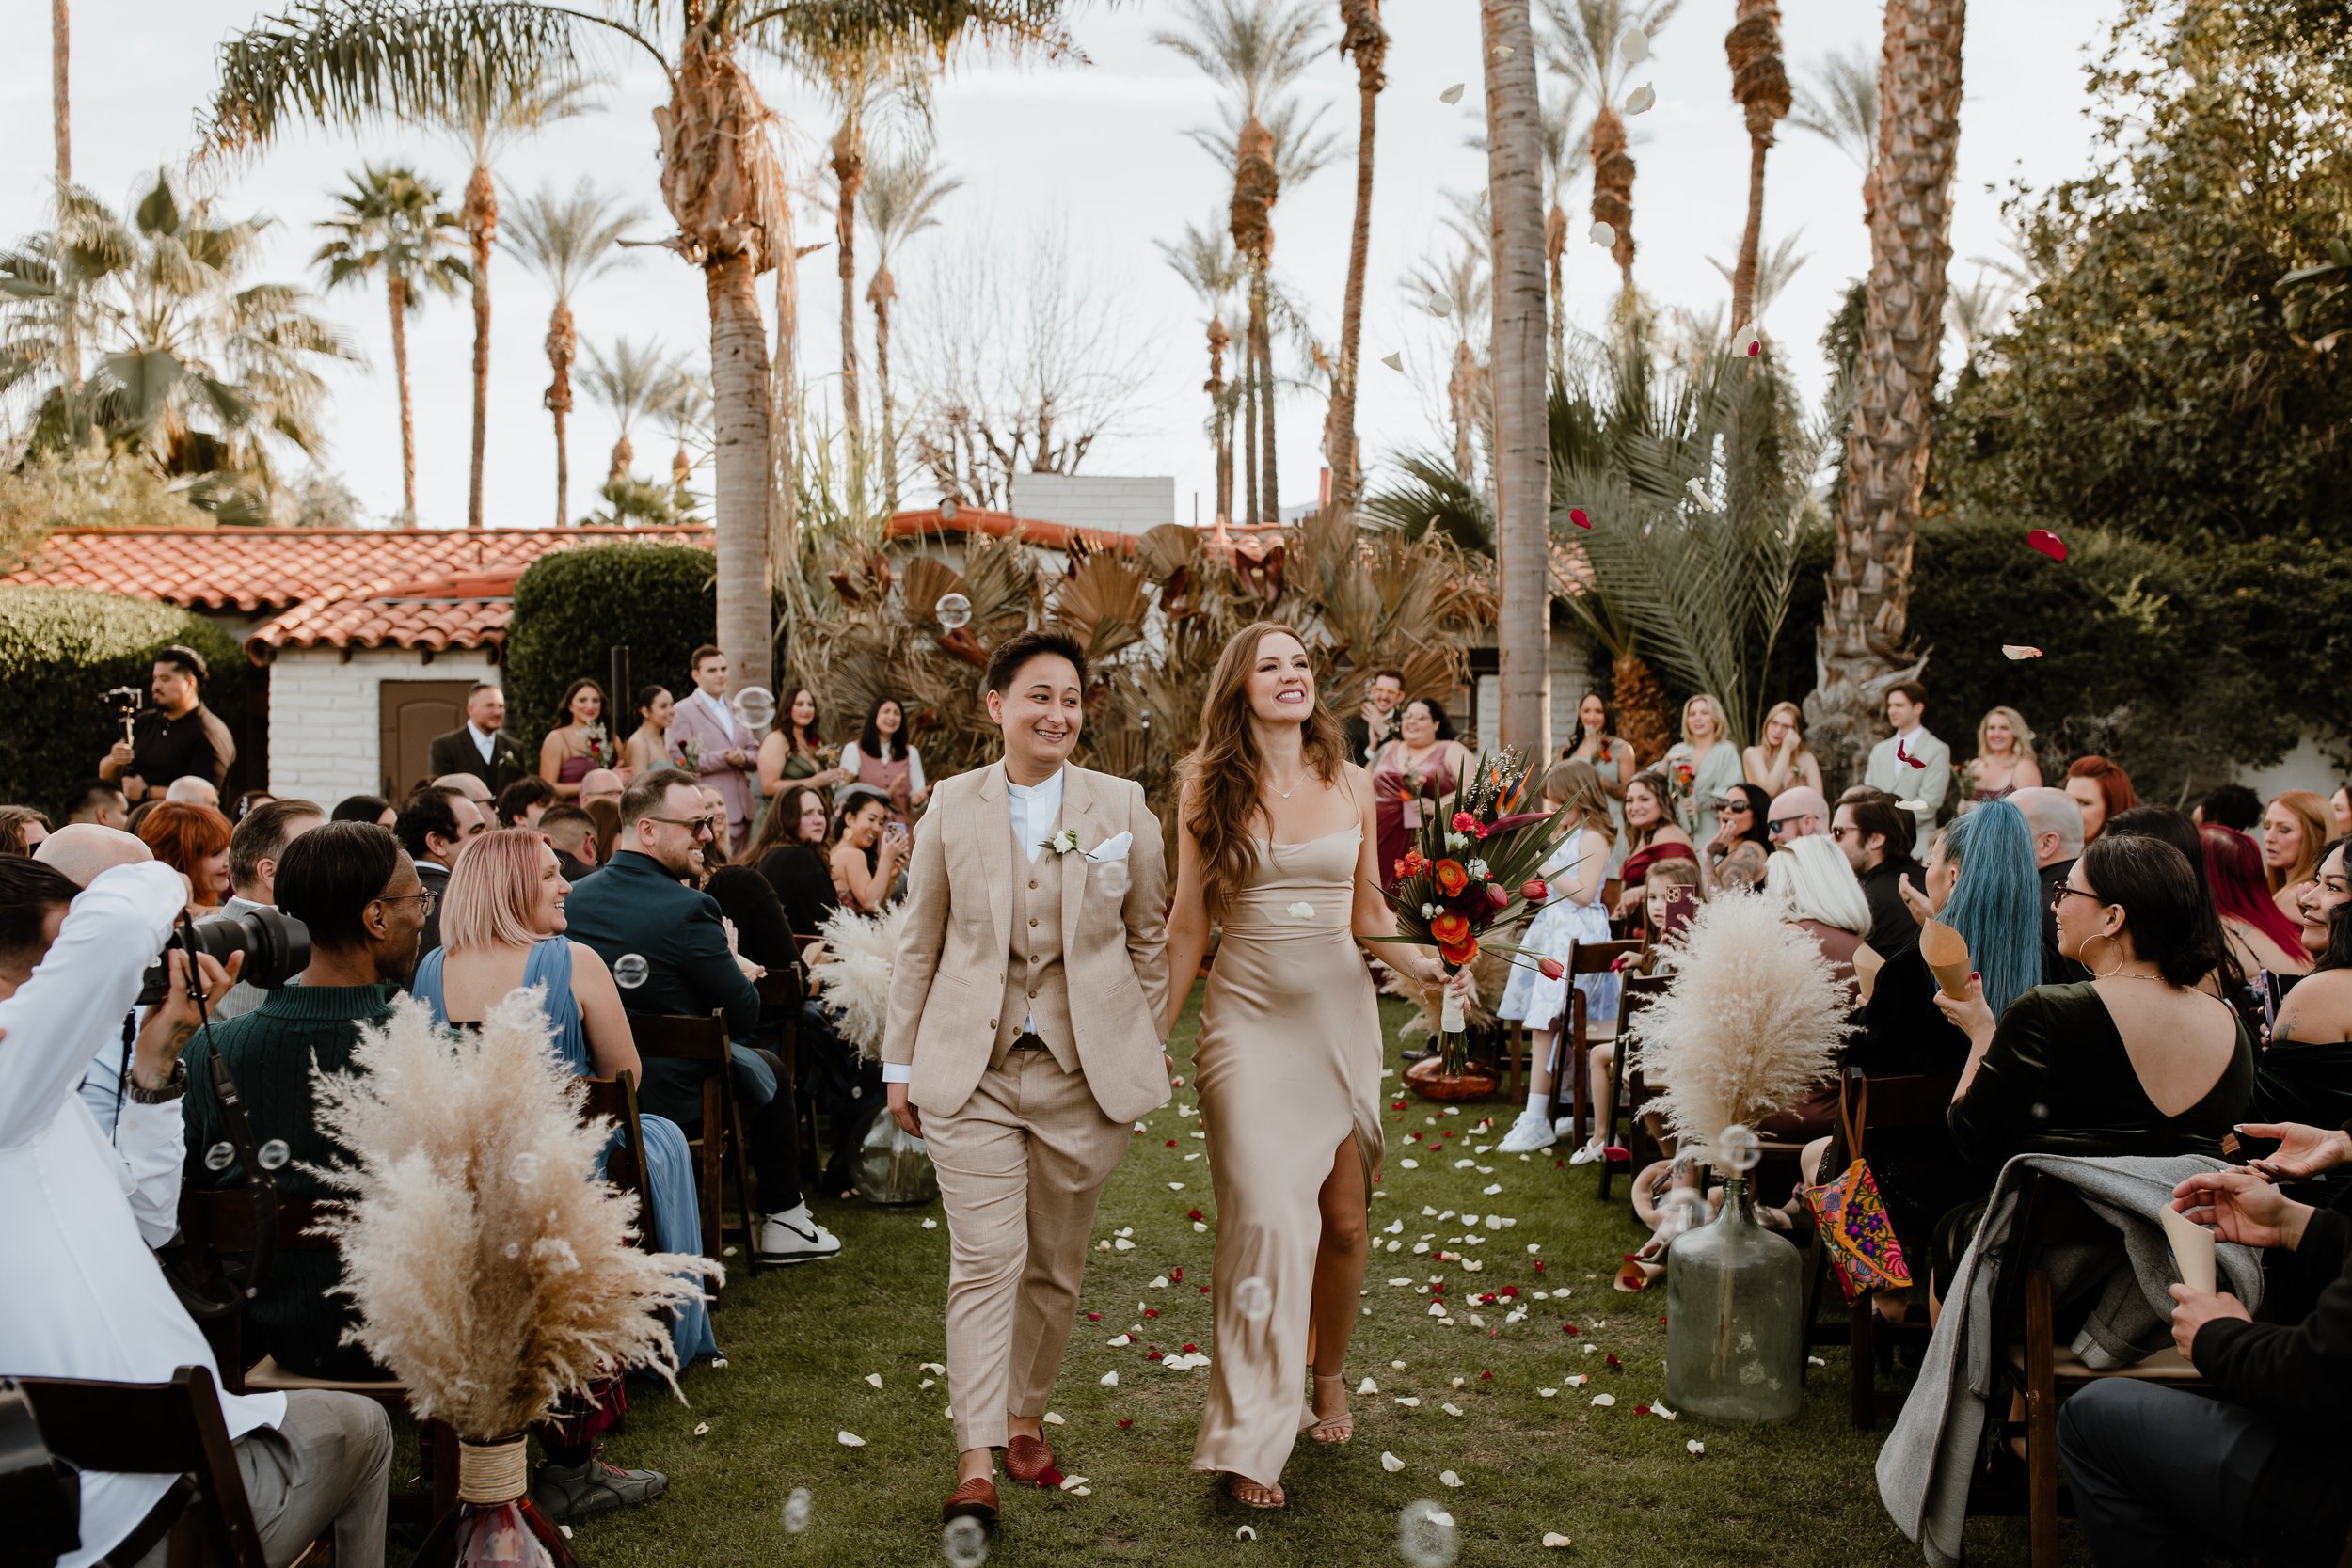  Allie and Ash's Wedding at Cree Estate Palm Springs - Eve Rox Photography 